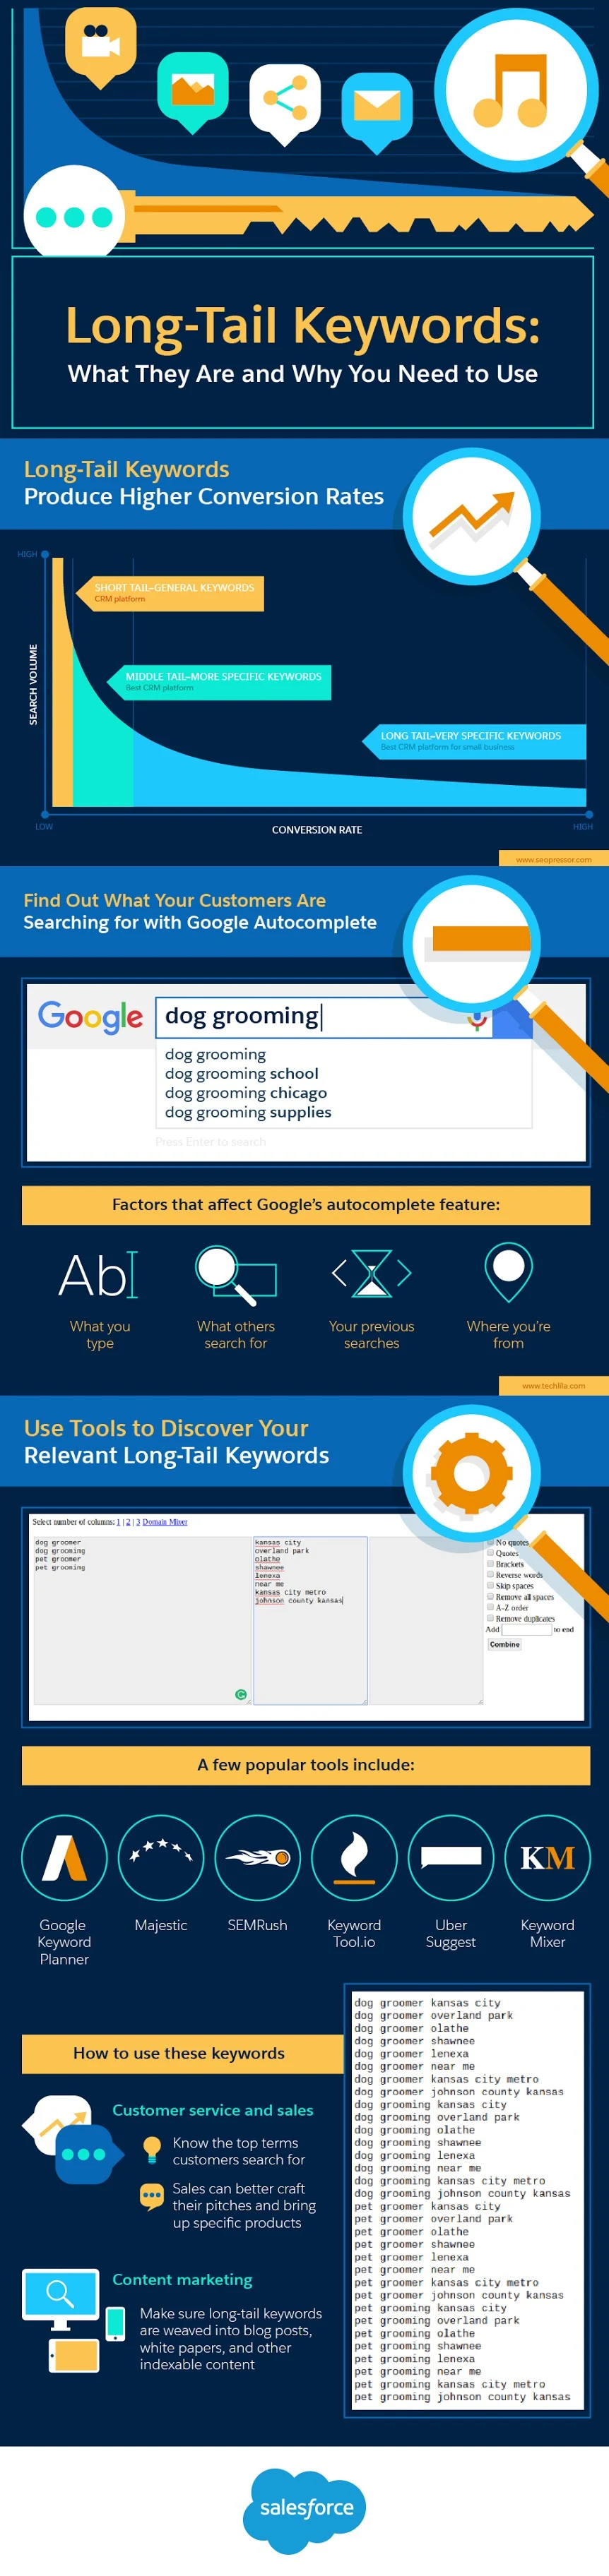 Long-Tail Keywords: What They Are and Why You Need to Use Them - infographic